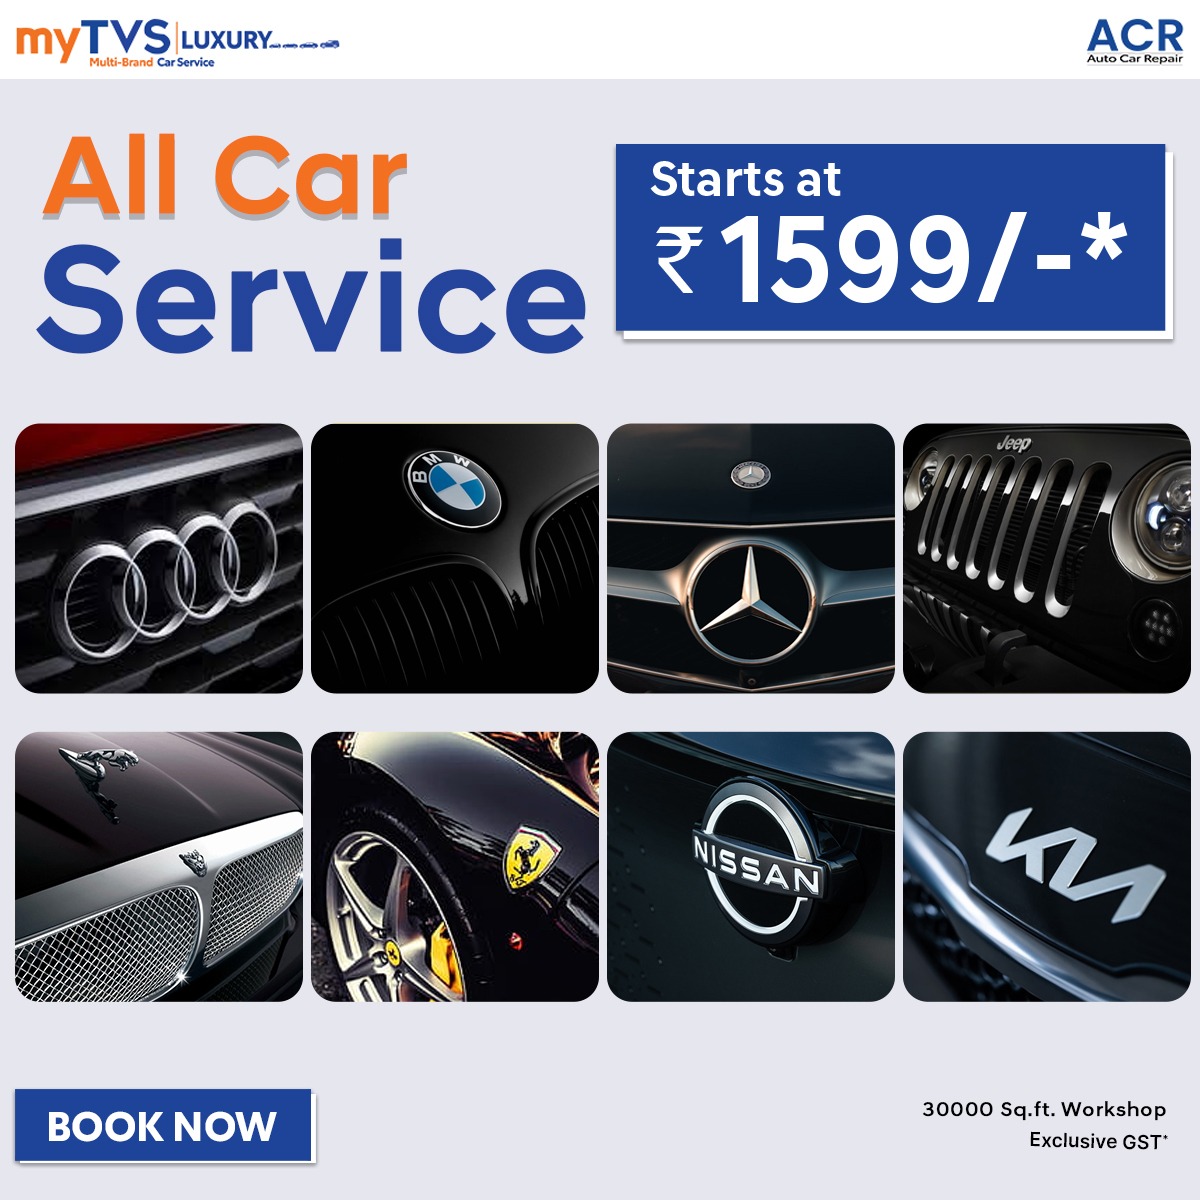 All Car Service Starting at Just Rs. 1599/-*!

Dial 9810446692 

#CarServiceExperts #AutoCarRepair